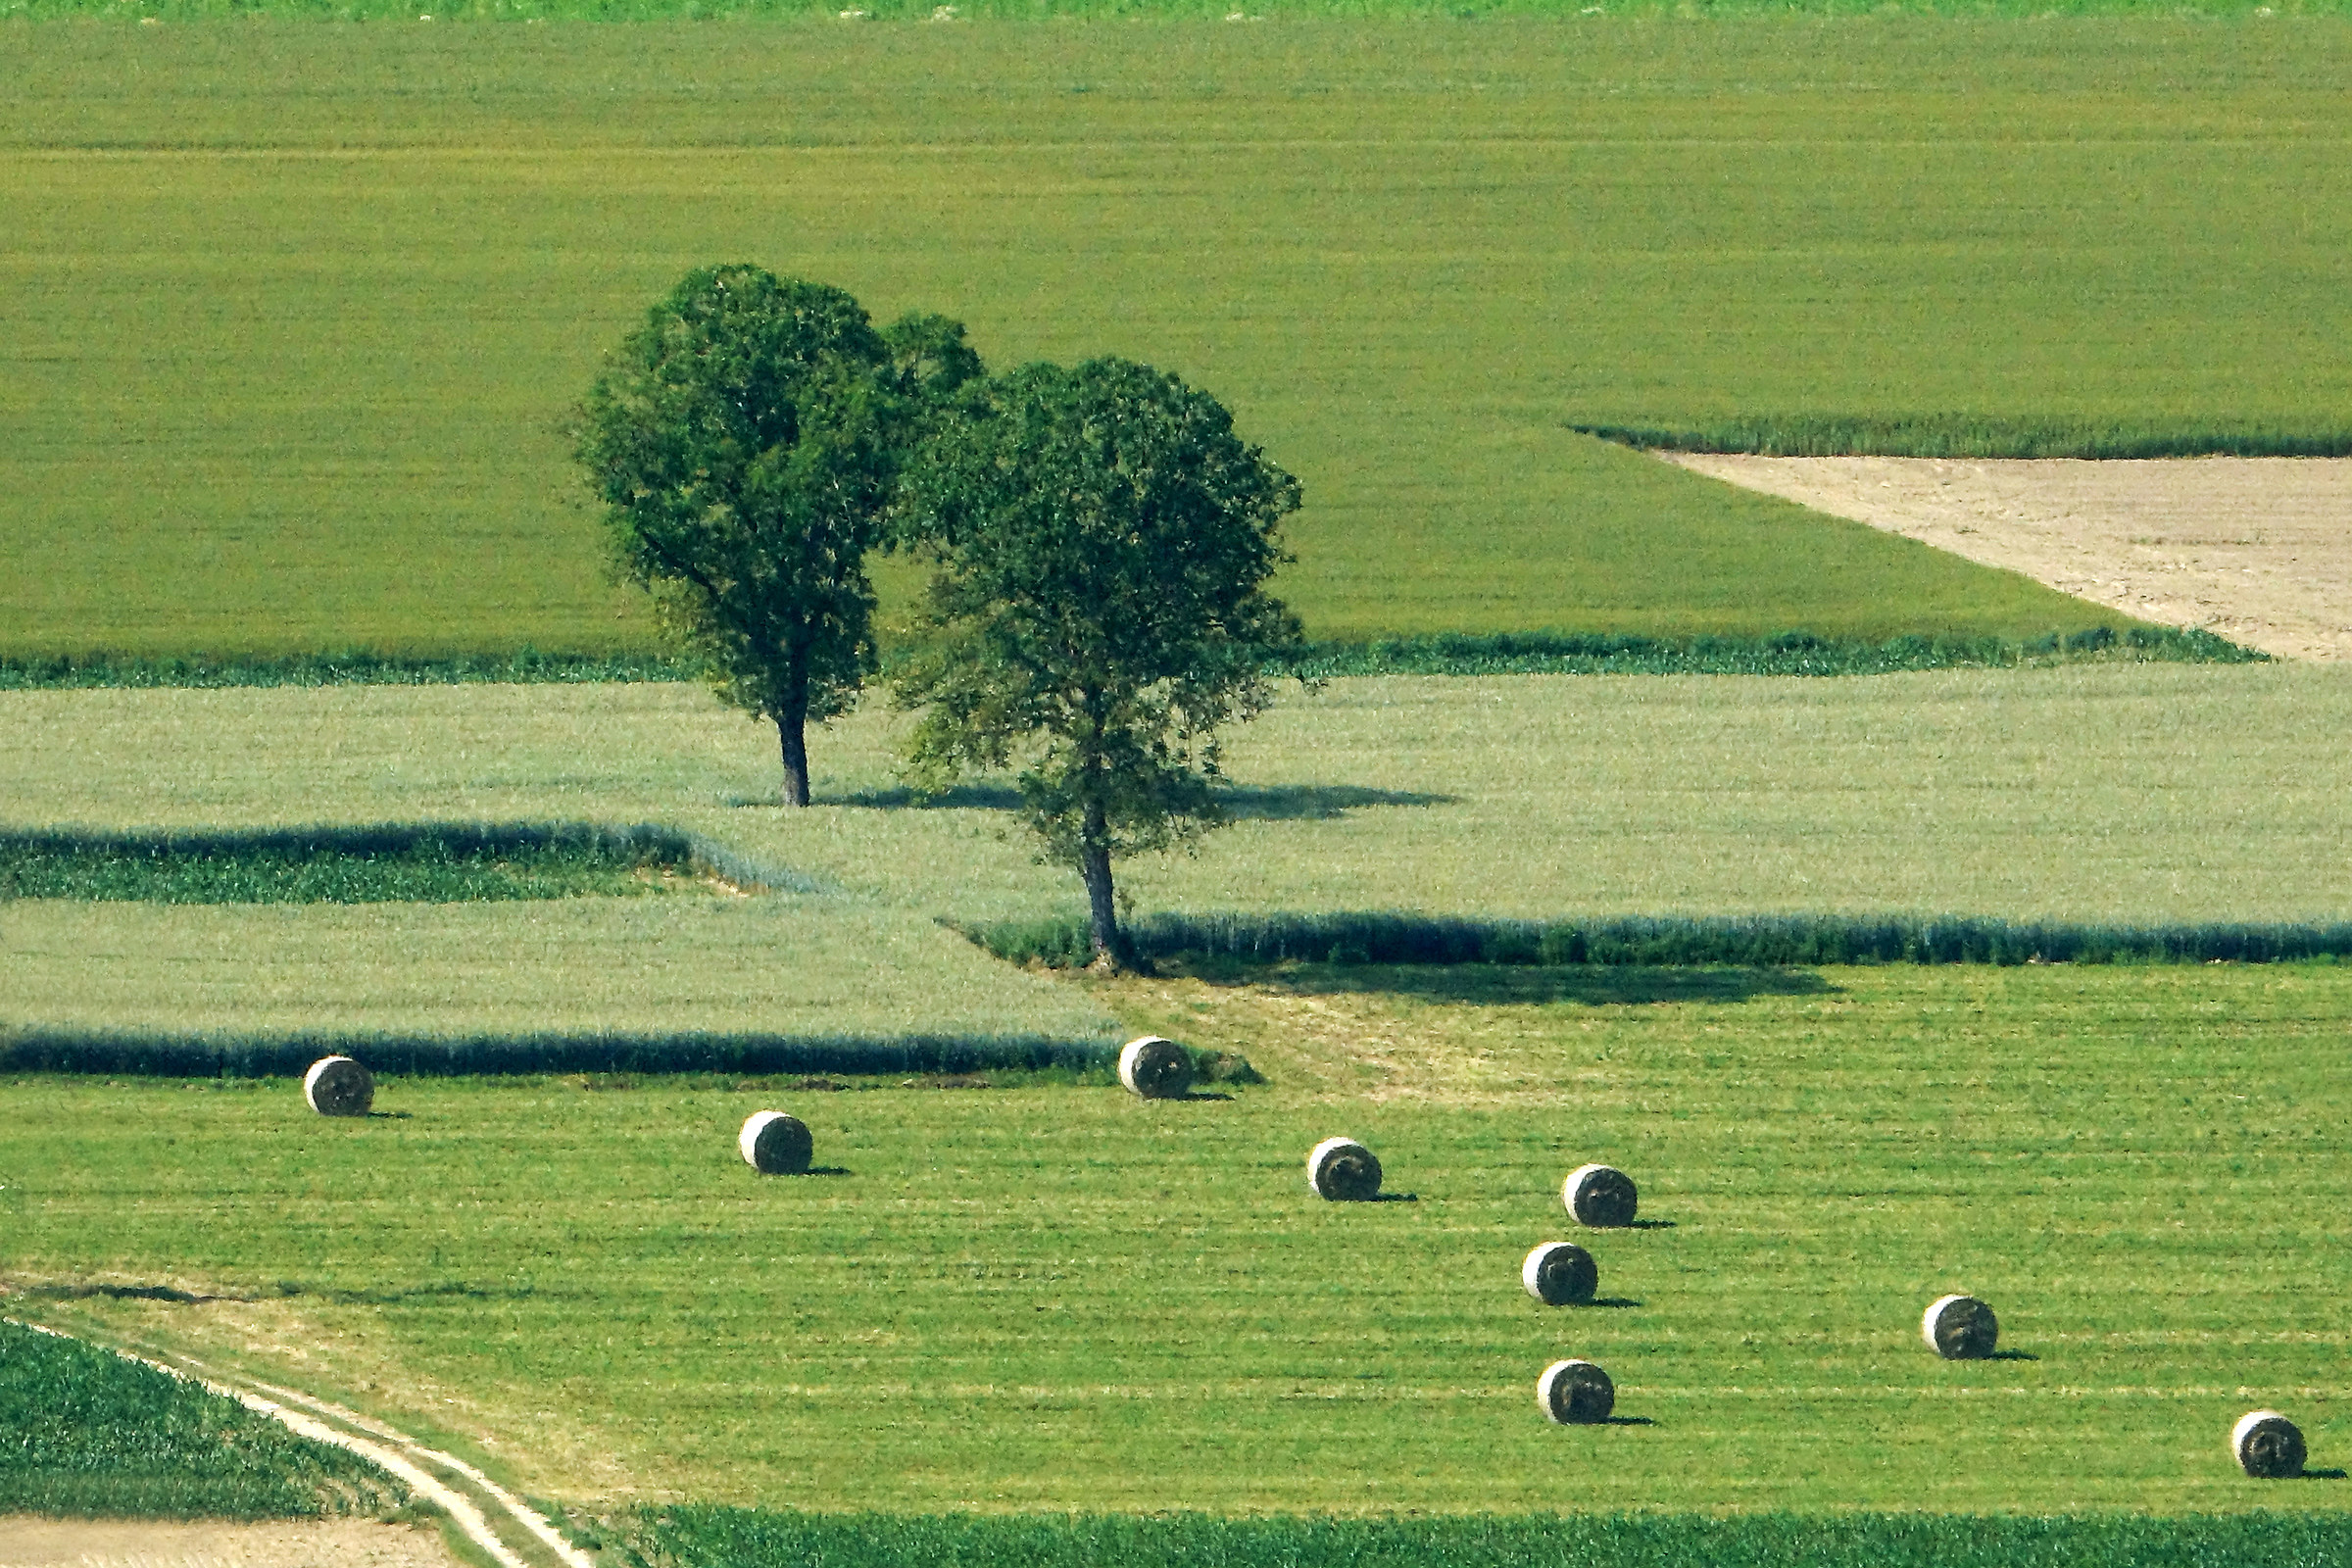 Other geometries in the fields...